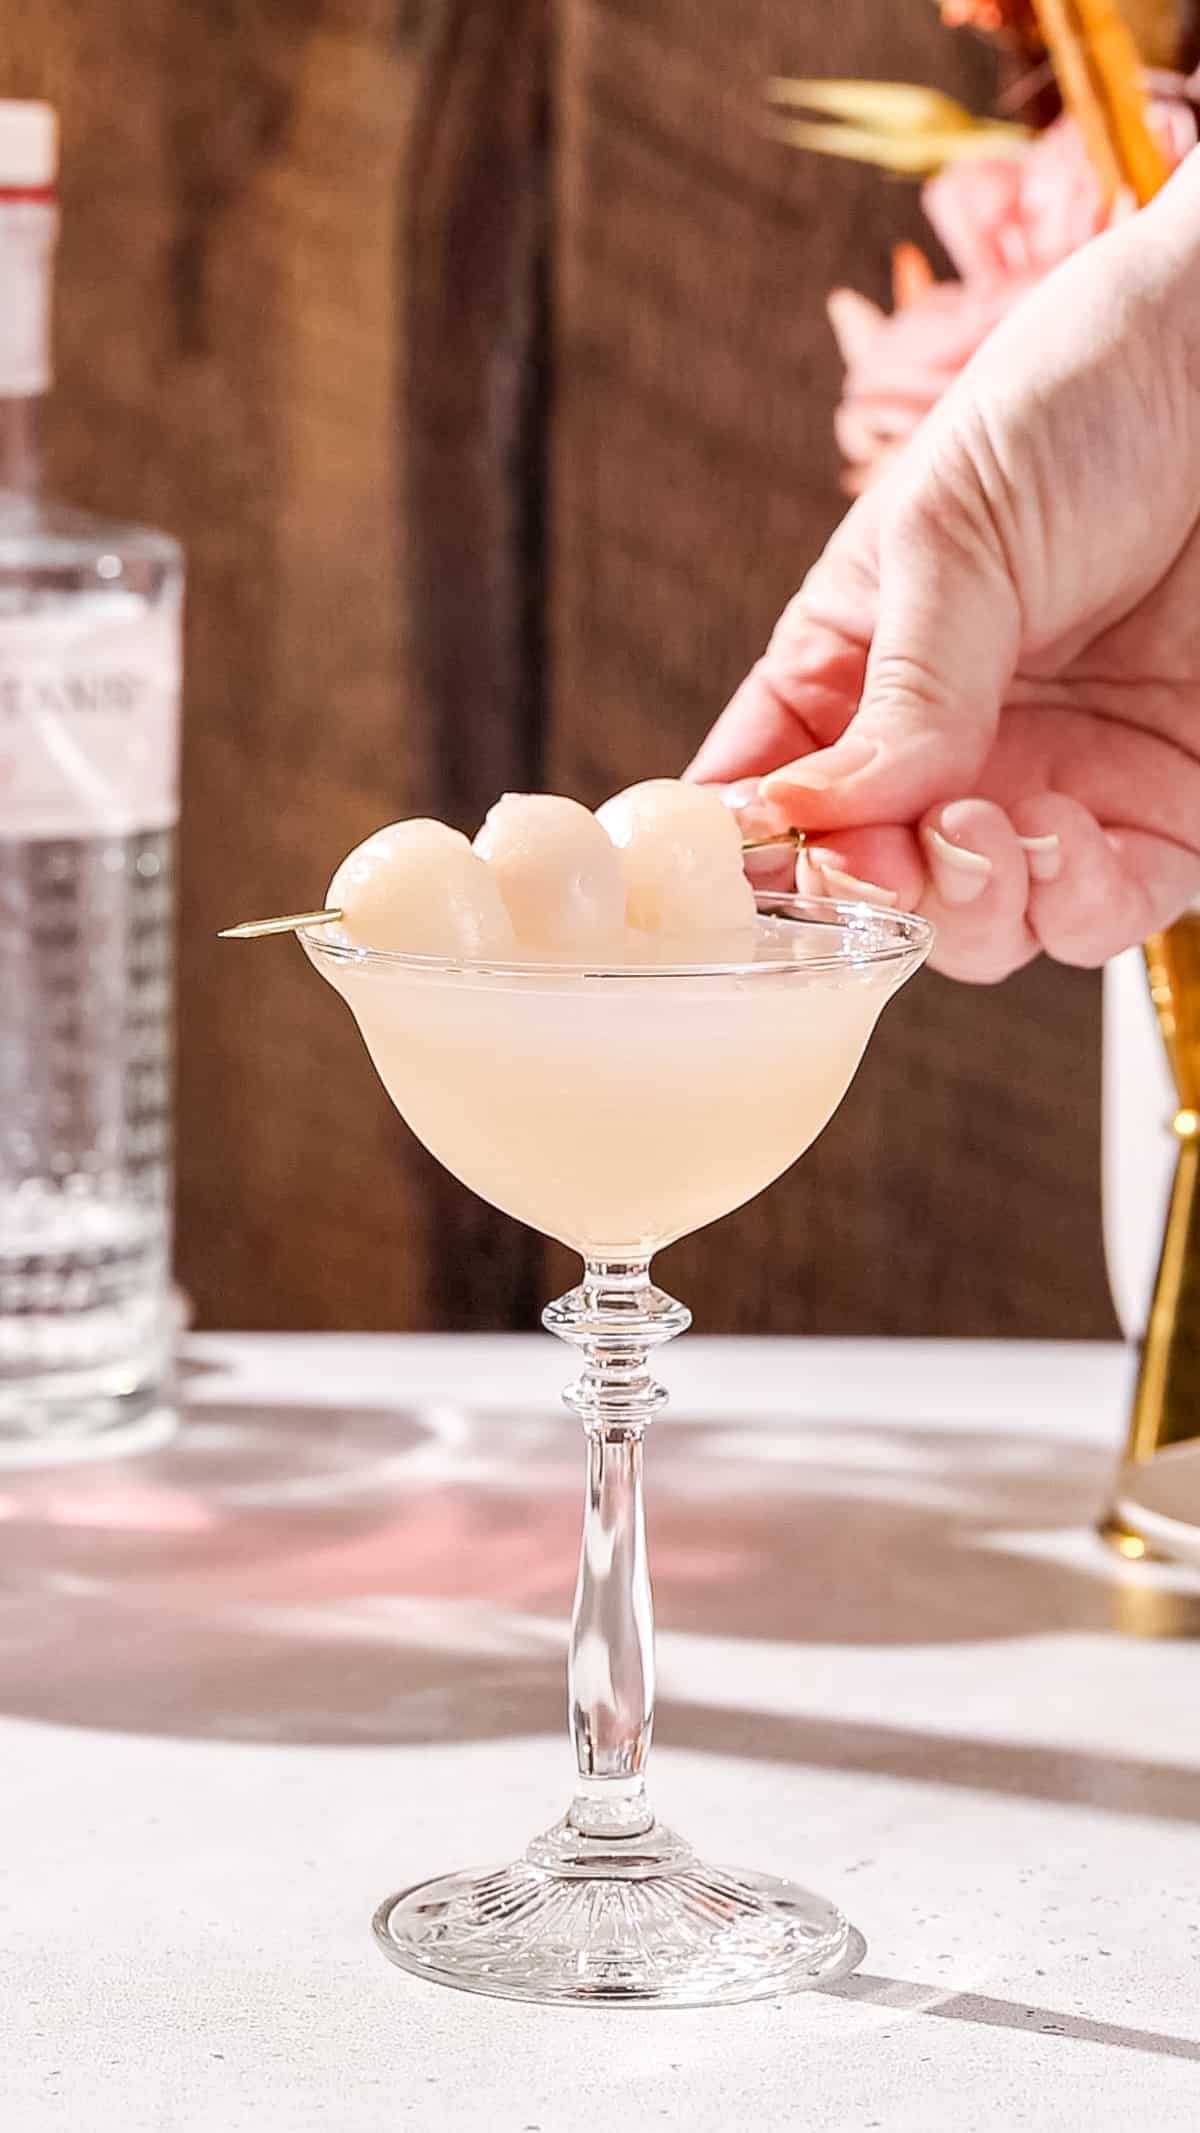 Hand adding a lychee fruit garnish to a cocktail.